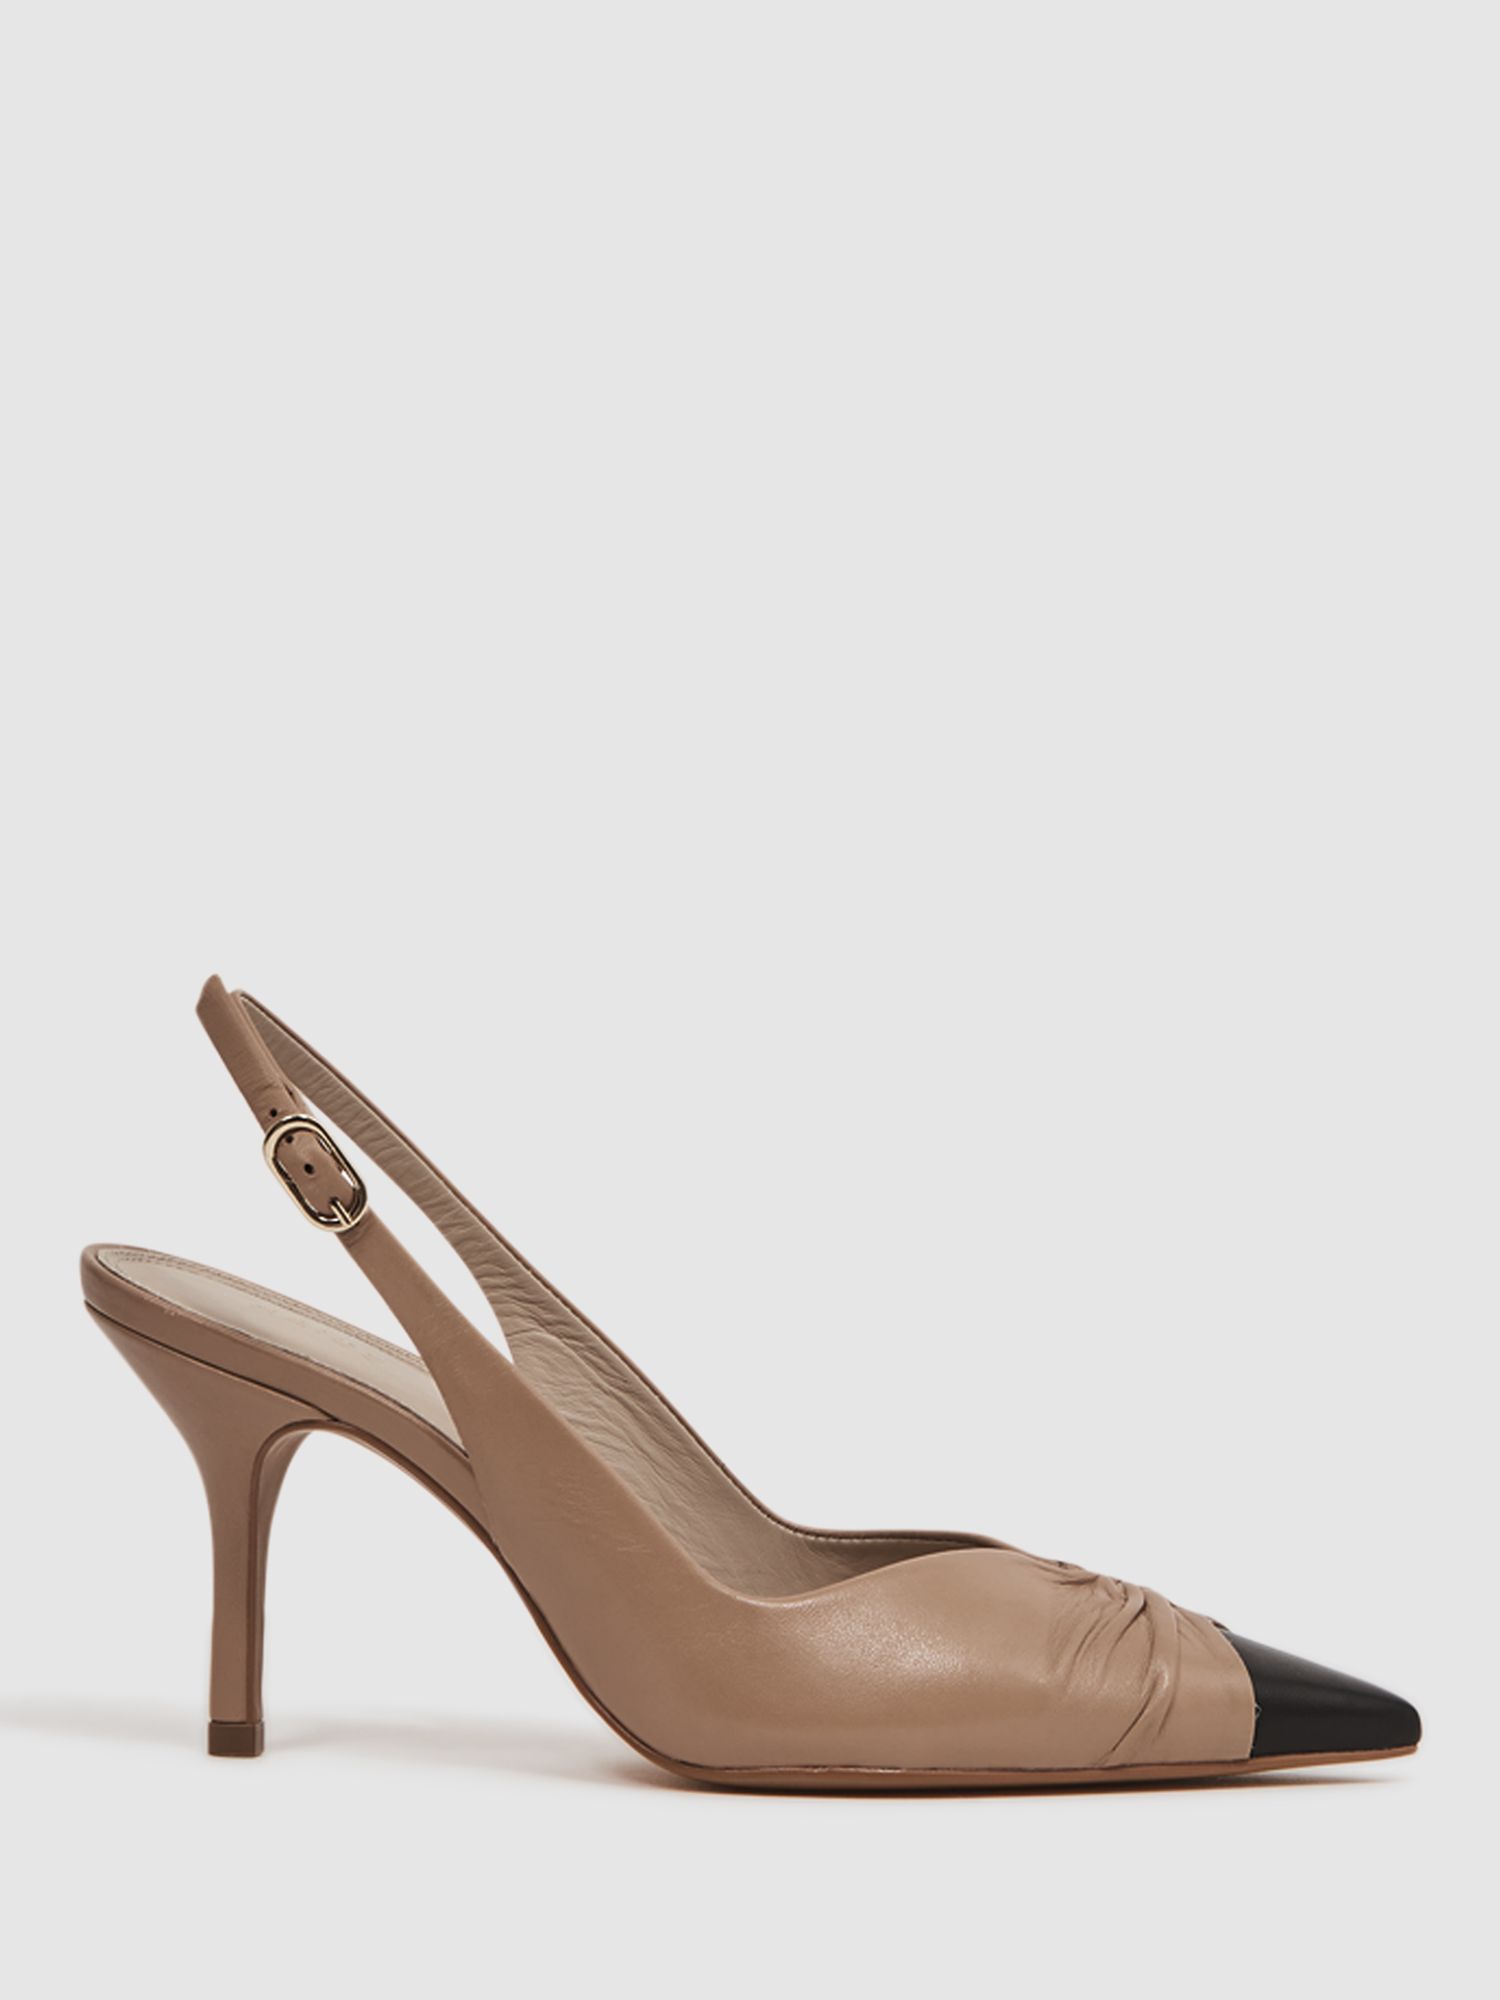 Reiss Delilah Leather Slingback Court Shoes, Nude